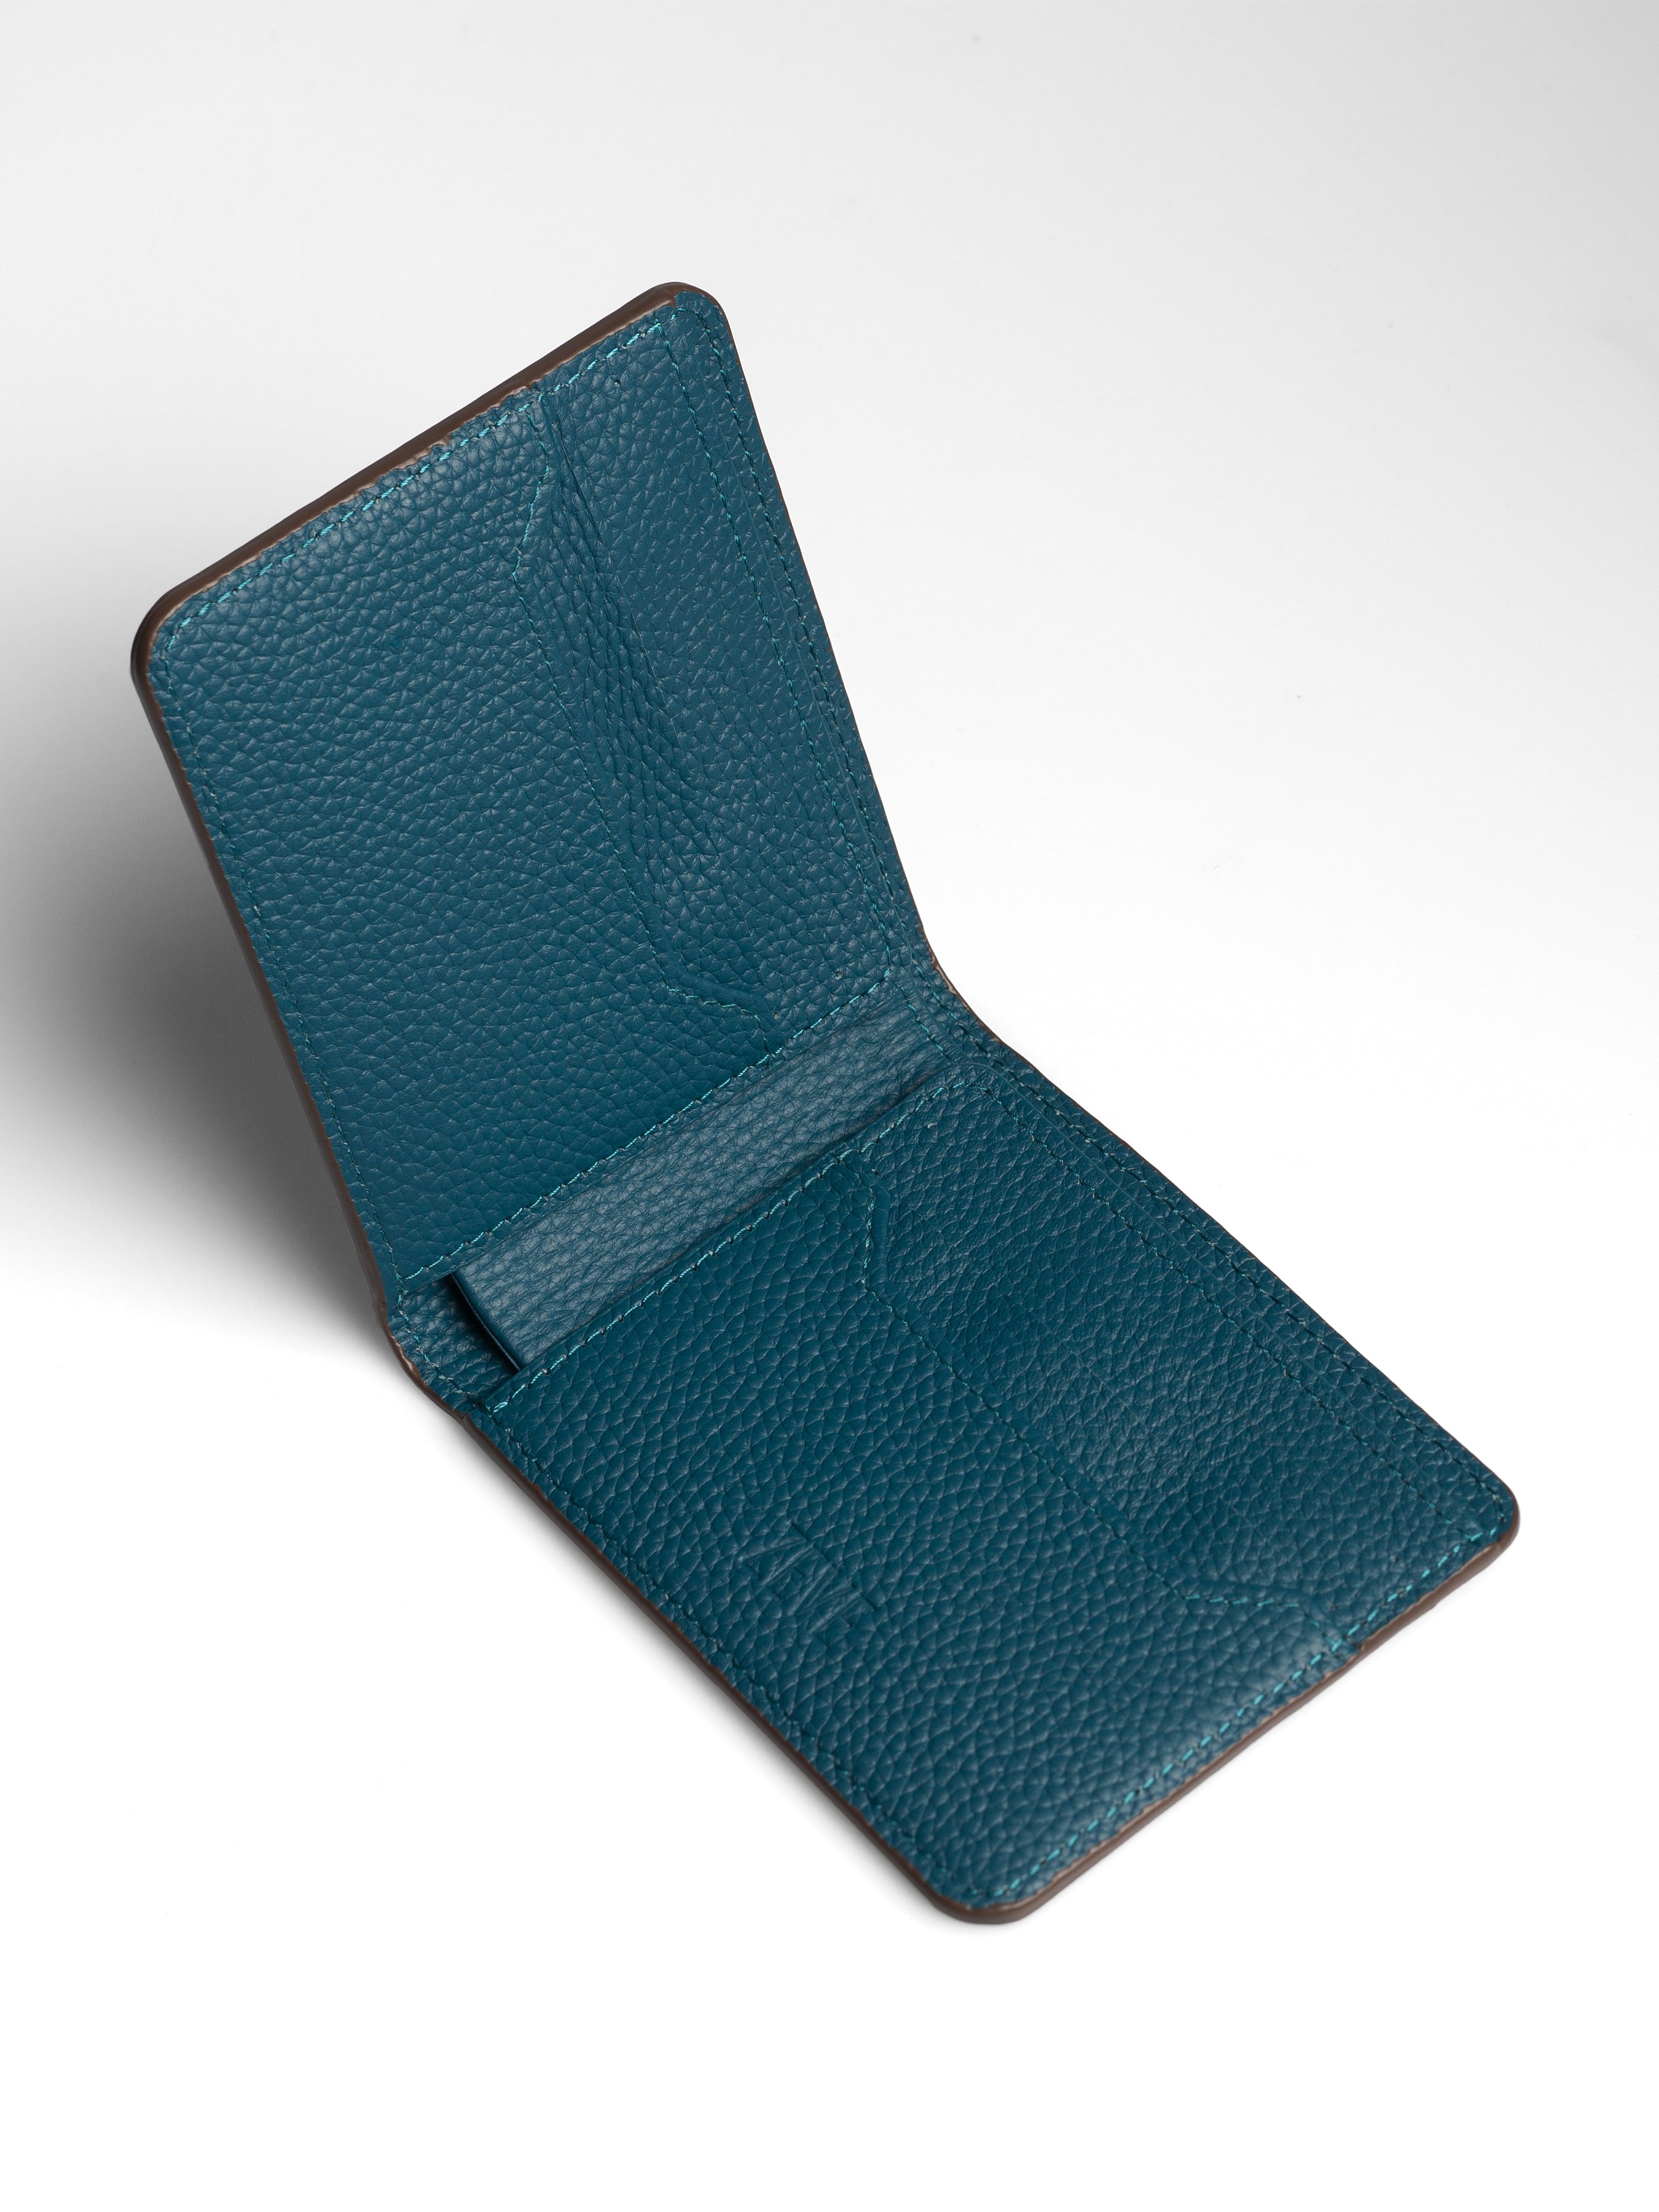 Artemis Croco Wallet - Coffee and Dark Turquoise Leather